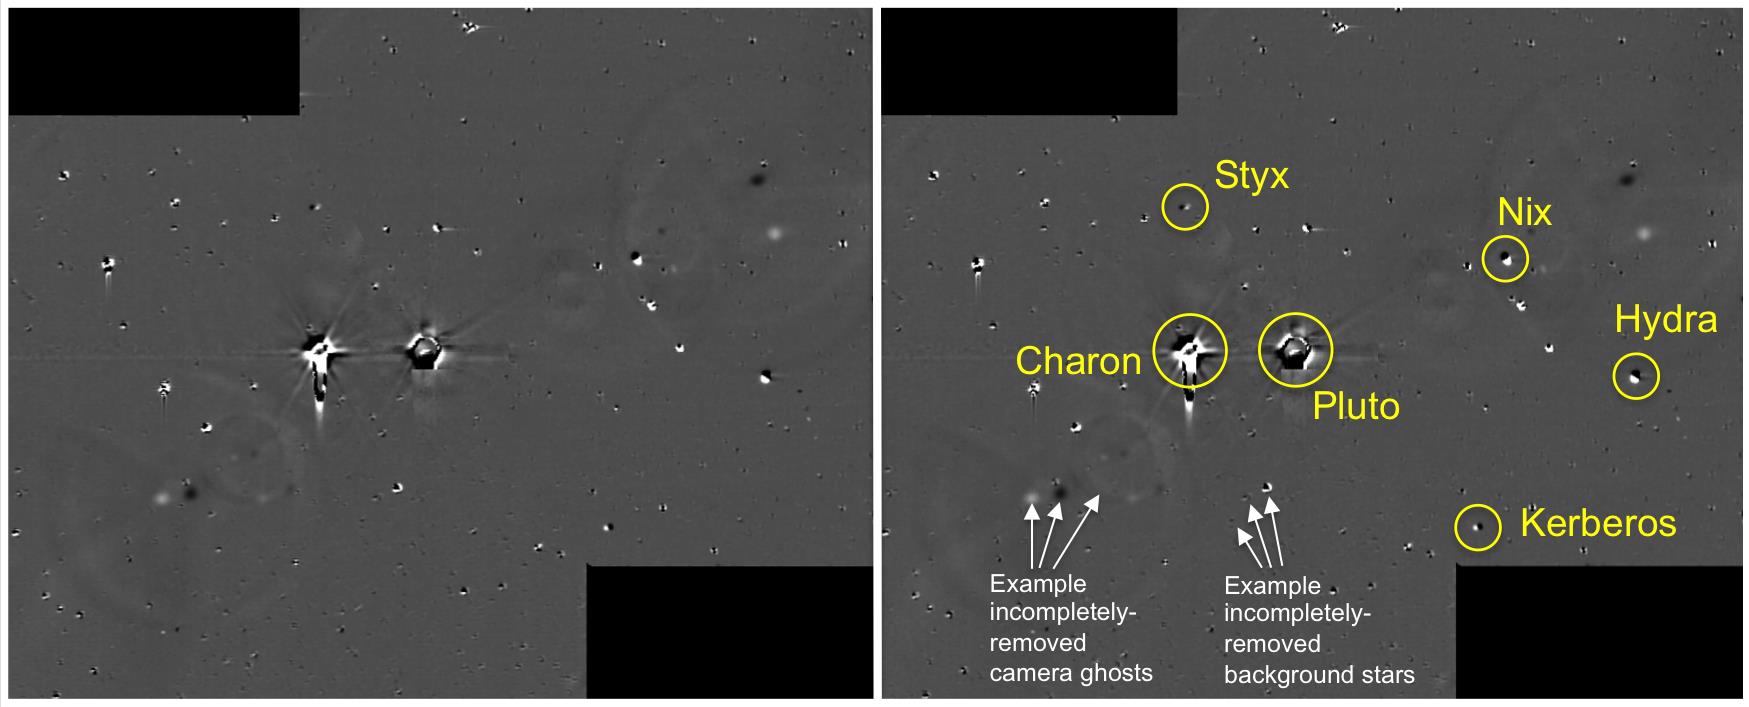 These images show the difference between two sets of 48 combined 10-second exposures with New Horizons' Long Range Reconnaissance Imager (LORRI) camera, taken at 8:40 UTC and 10:25 UTC on June 26, 2015, from a range of 21.5 million kilometers (approximately 13 million miles) to Pluto. The known small moons, Nix, Hydra, Kerberos and Styx, are visible as adjacent bright and dark pairs of dots, due to their motion in the 105 minutes between the two image sets. Credits: NASA/JHU-APL/SwRI